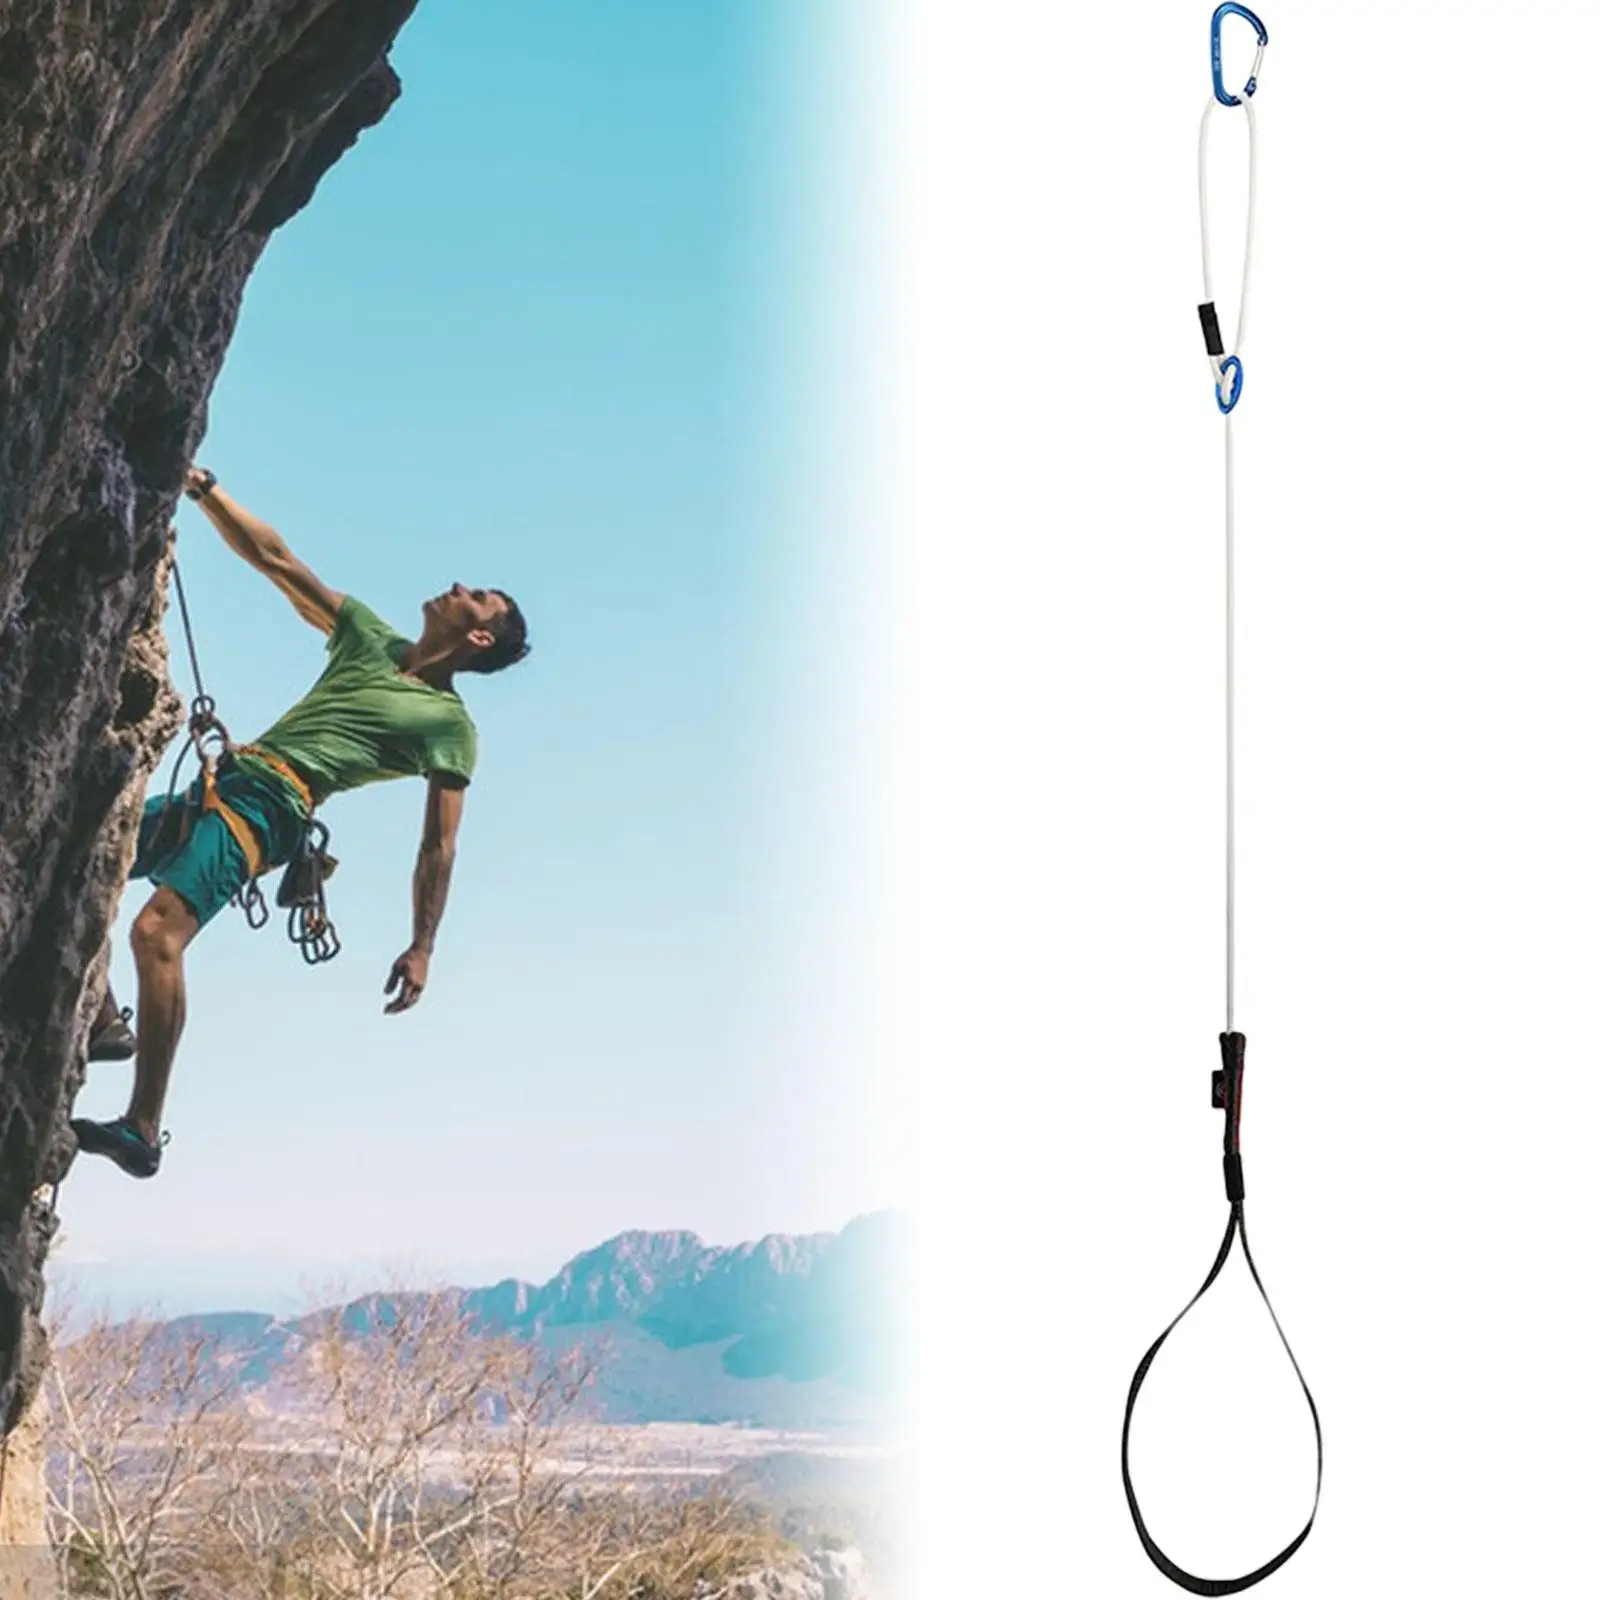 Climbing Ascender Rope Foot Loop Ascender Gear Rigging for Mountaineering